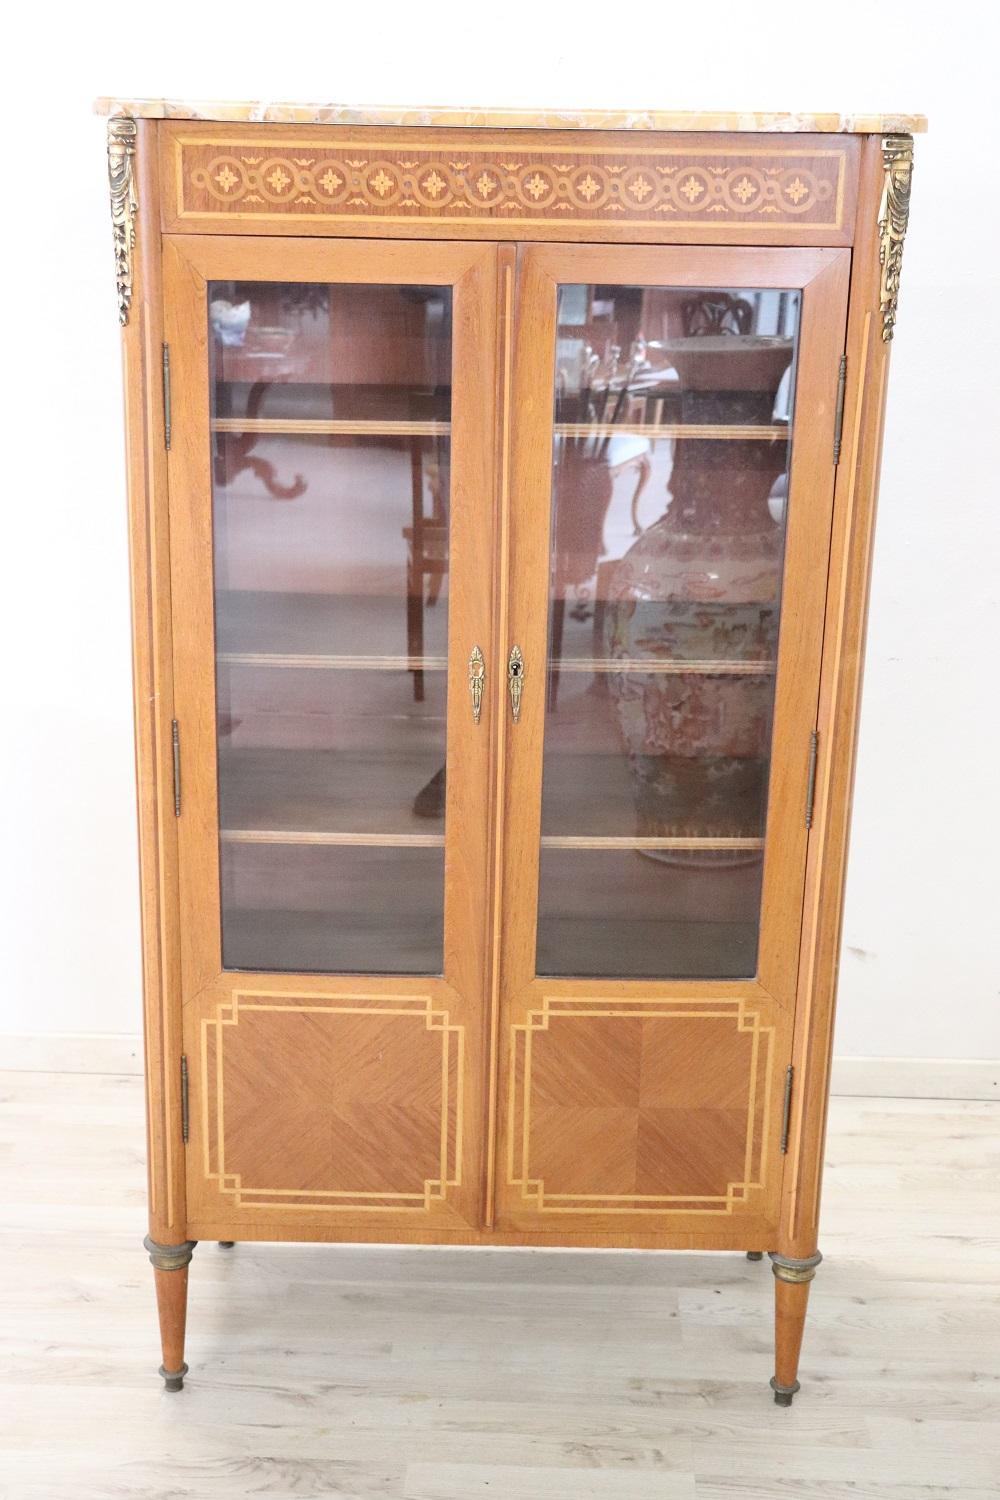 Elegant Louis XVI style vitrine characterized by finely inlaid walnut. Enriched with precious finely chiseled golden bronzes. Refined and rare yellow marble top. Internally four shelves that can be moved to the desired height. Perfect for displaying